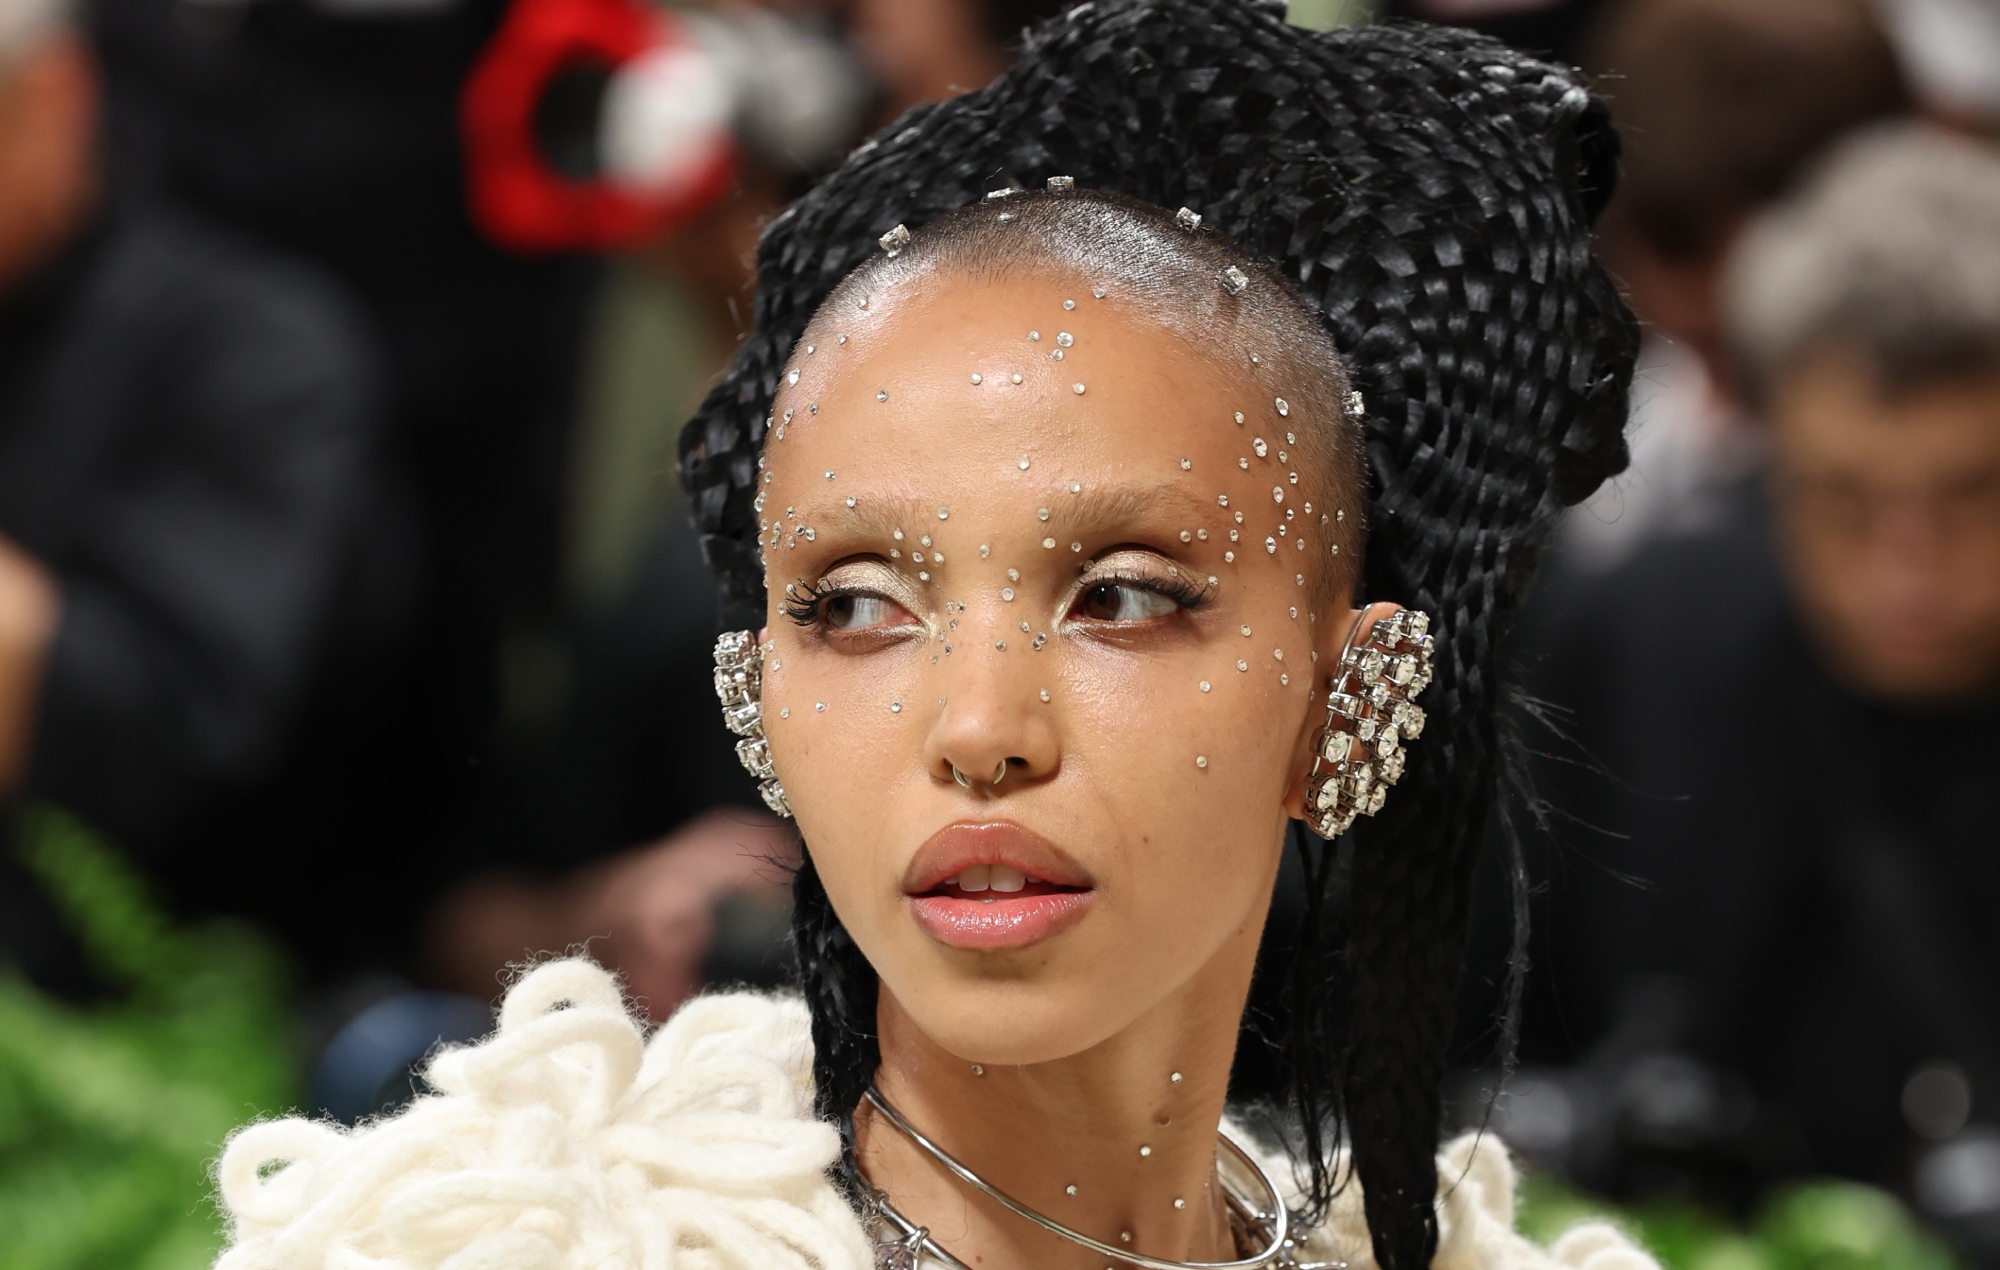 FKA Twigs seeking $10million from Shia LaBeouf in abuse lawsuit – claiming he’s improperly seeking her private records